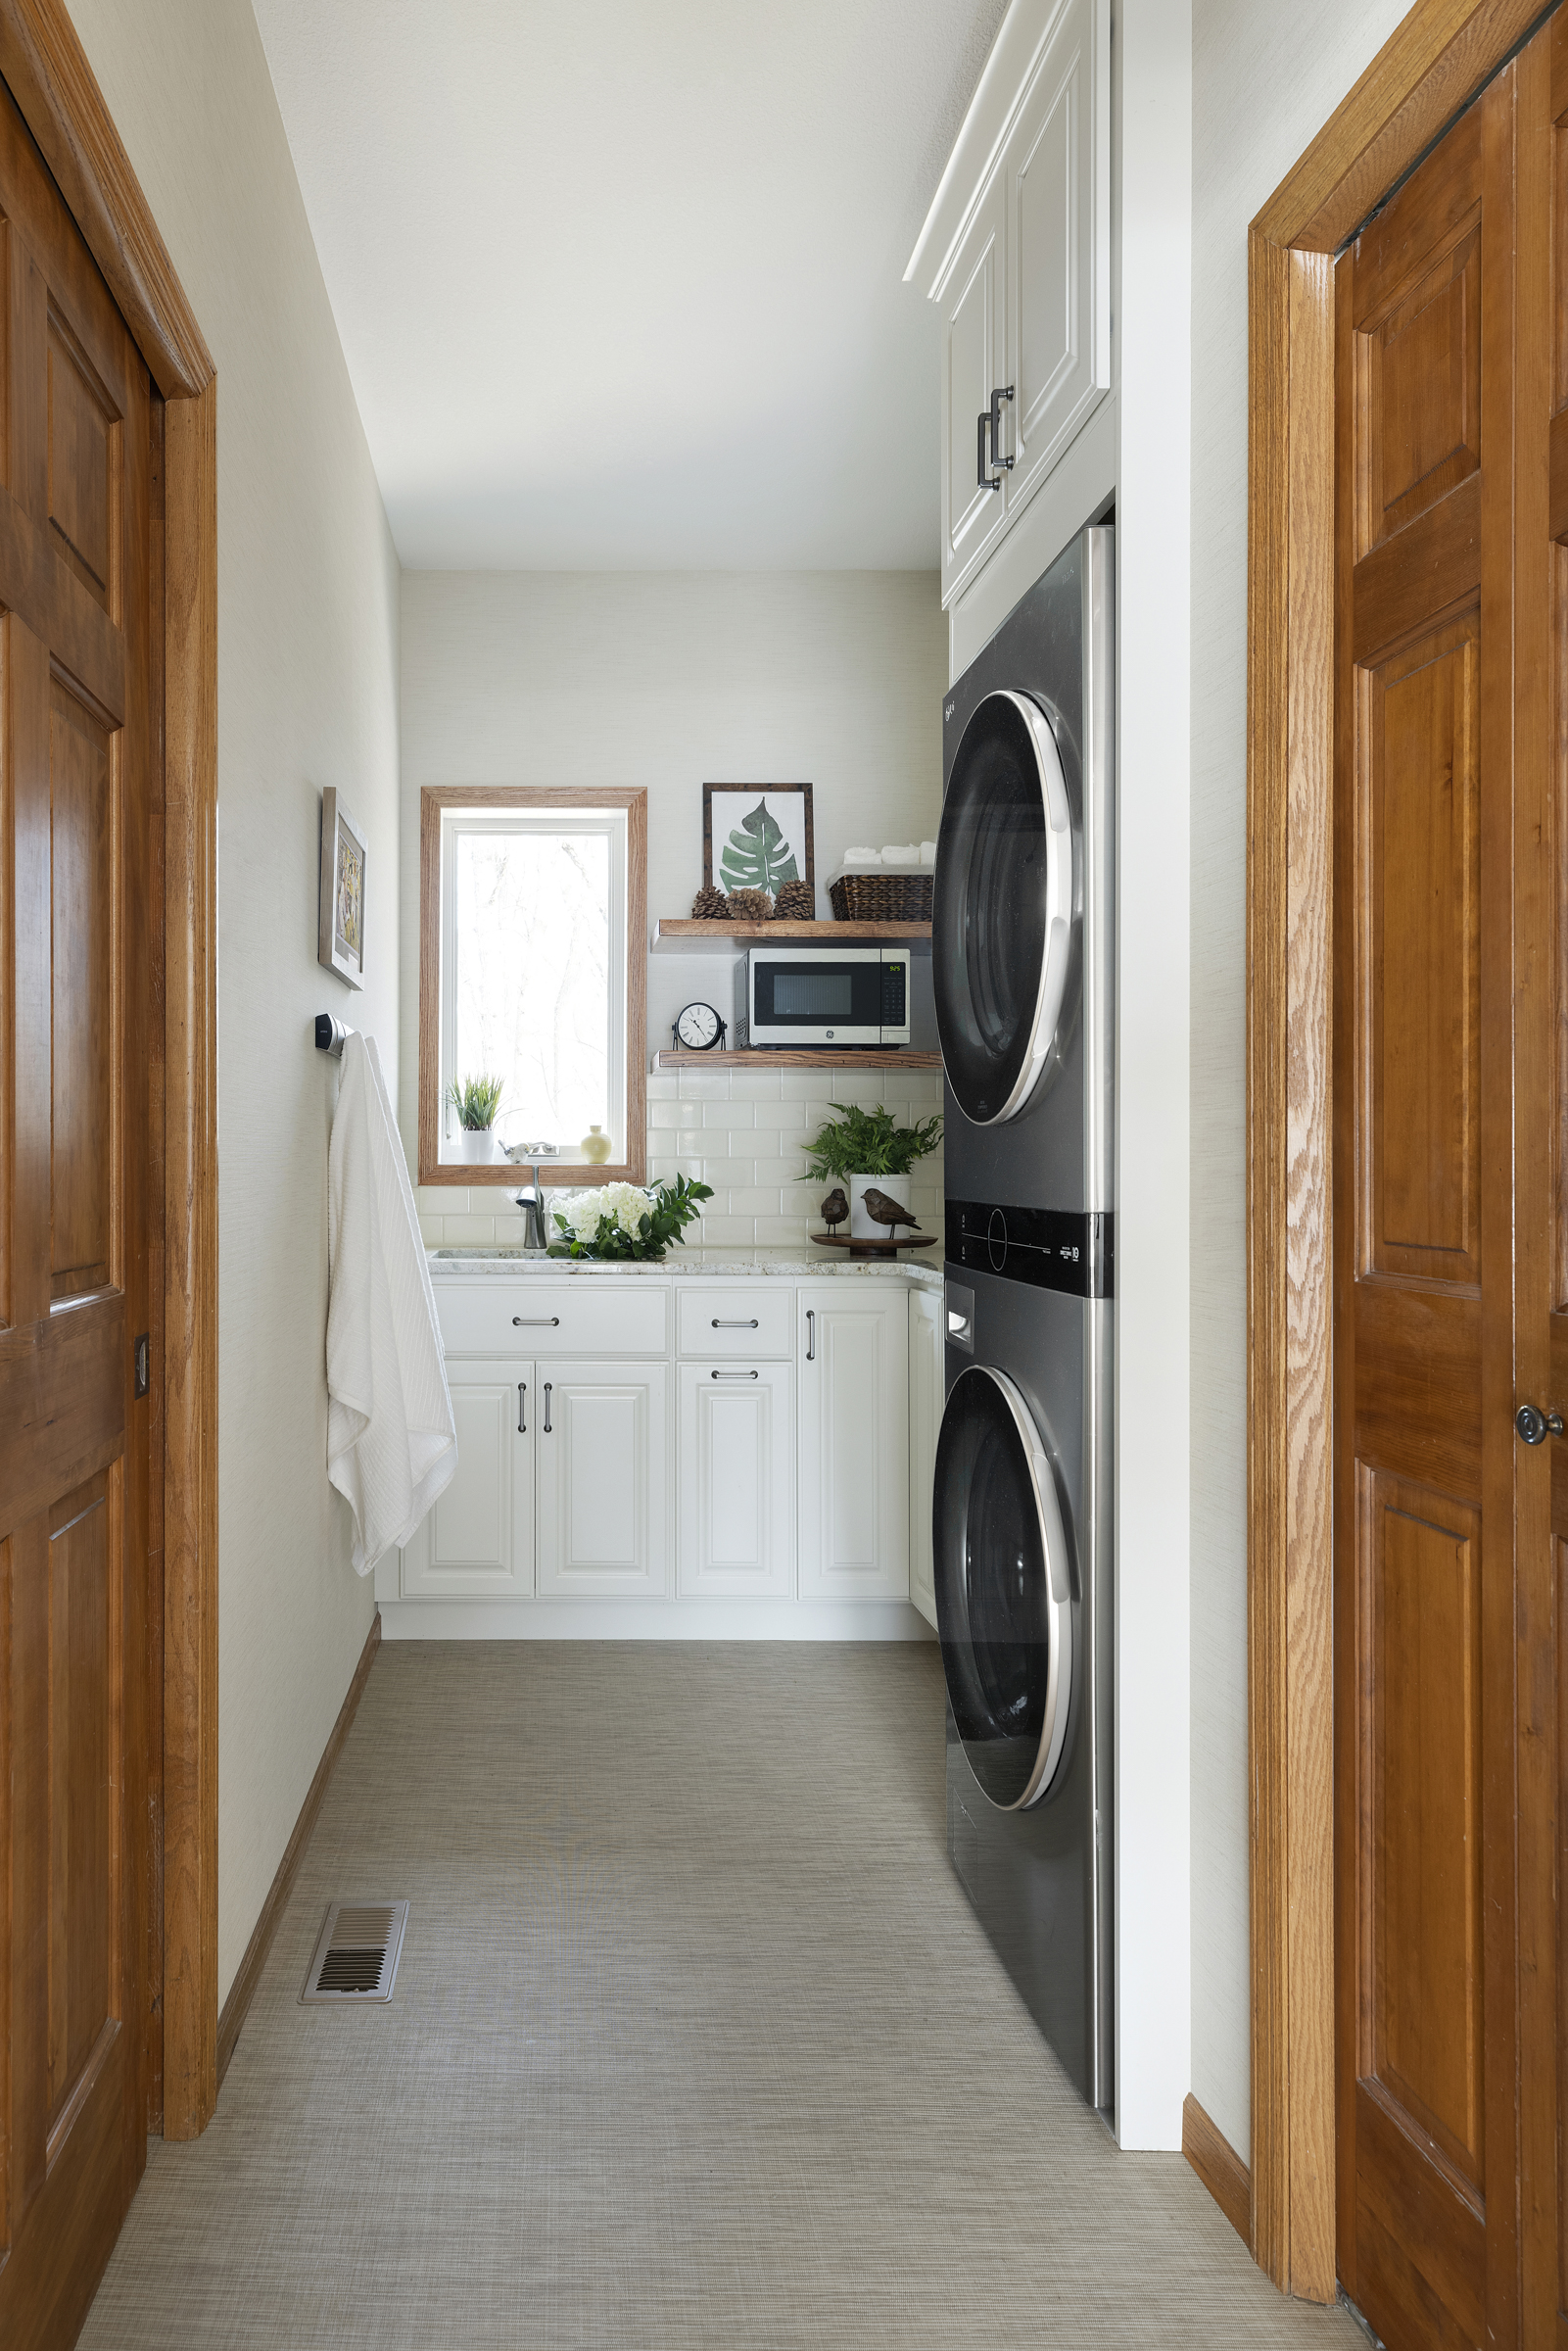 Remodeled laundry room with wooden doors, white cabinets, and stacked washer/dryer